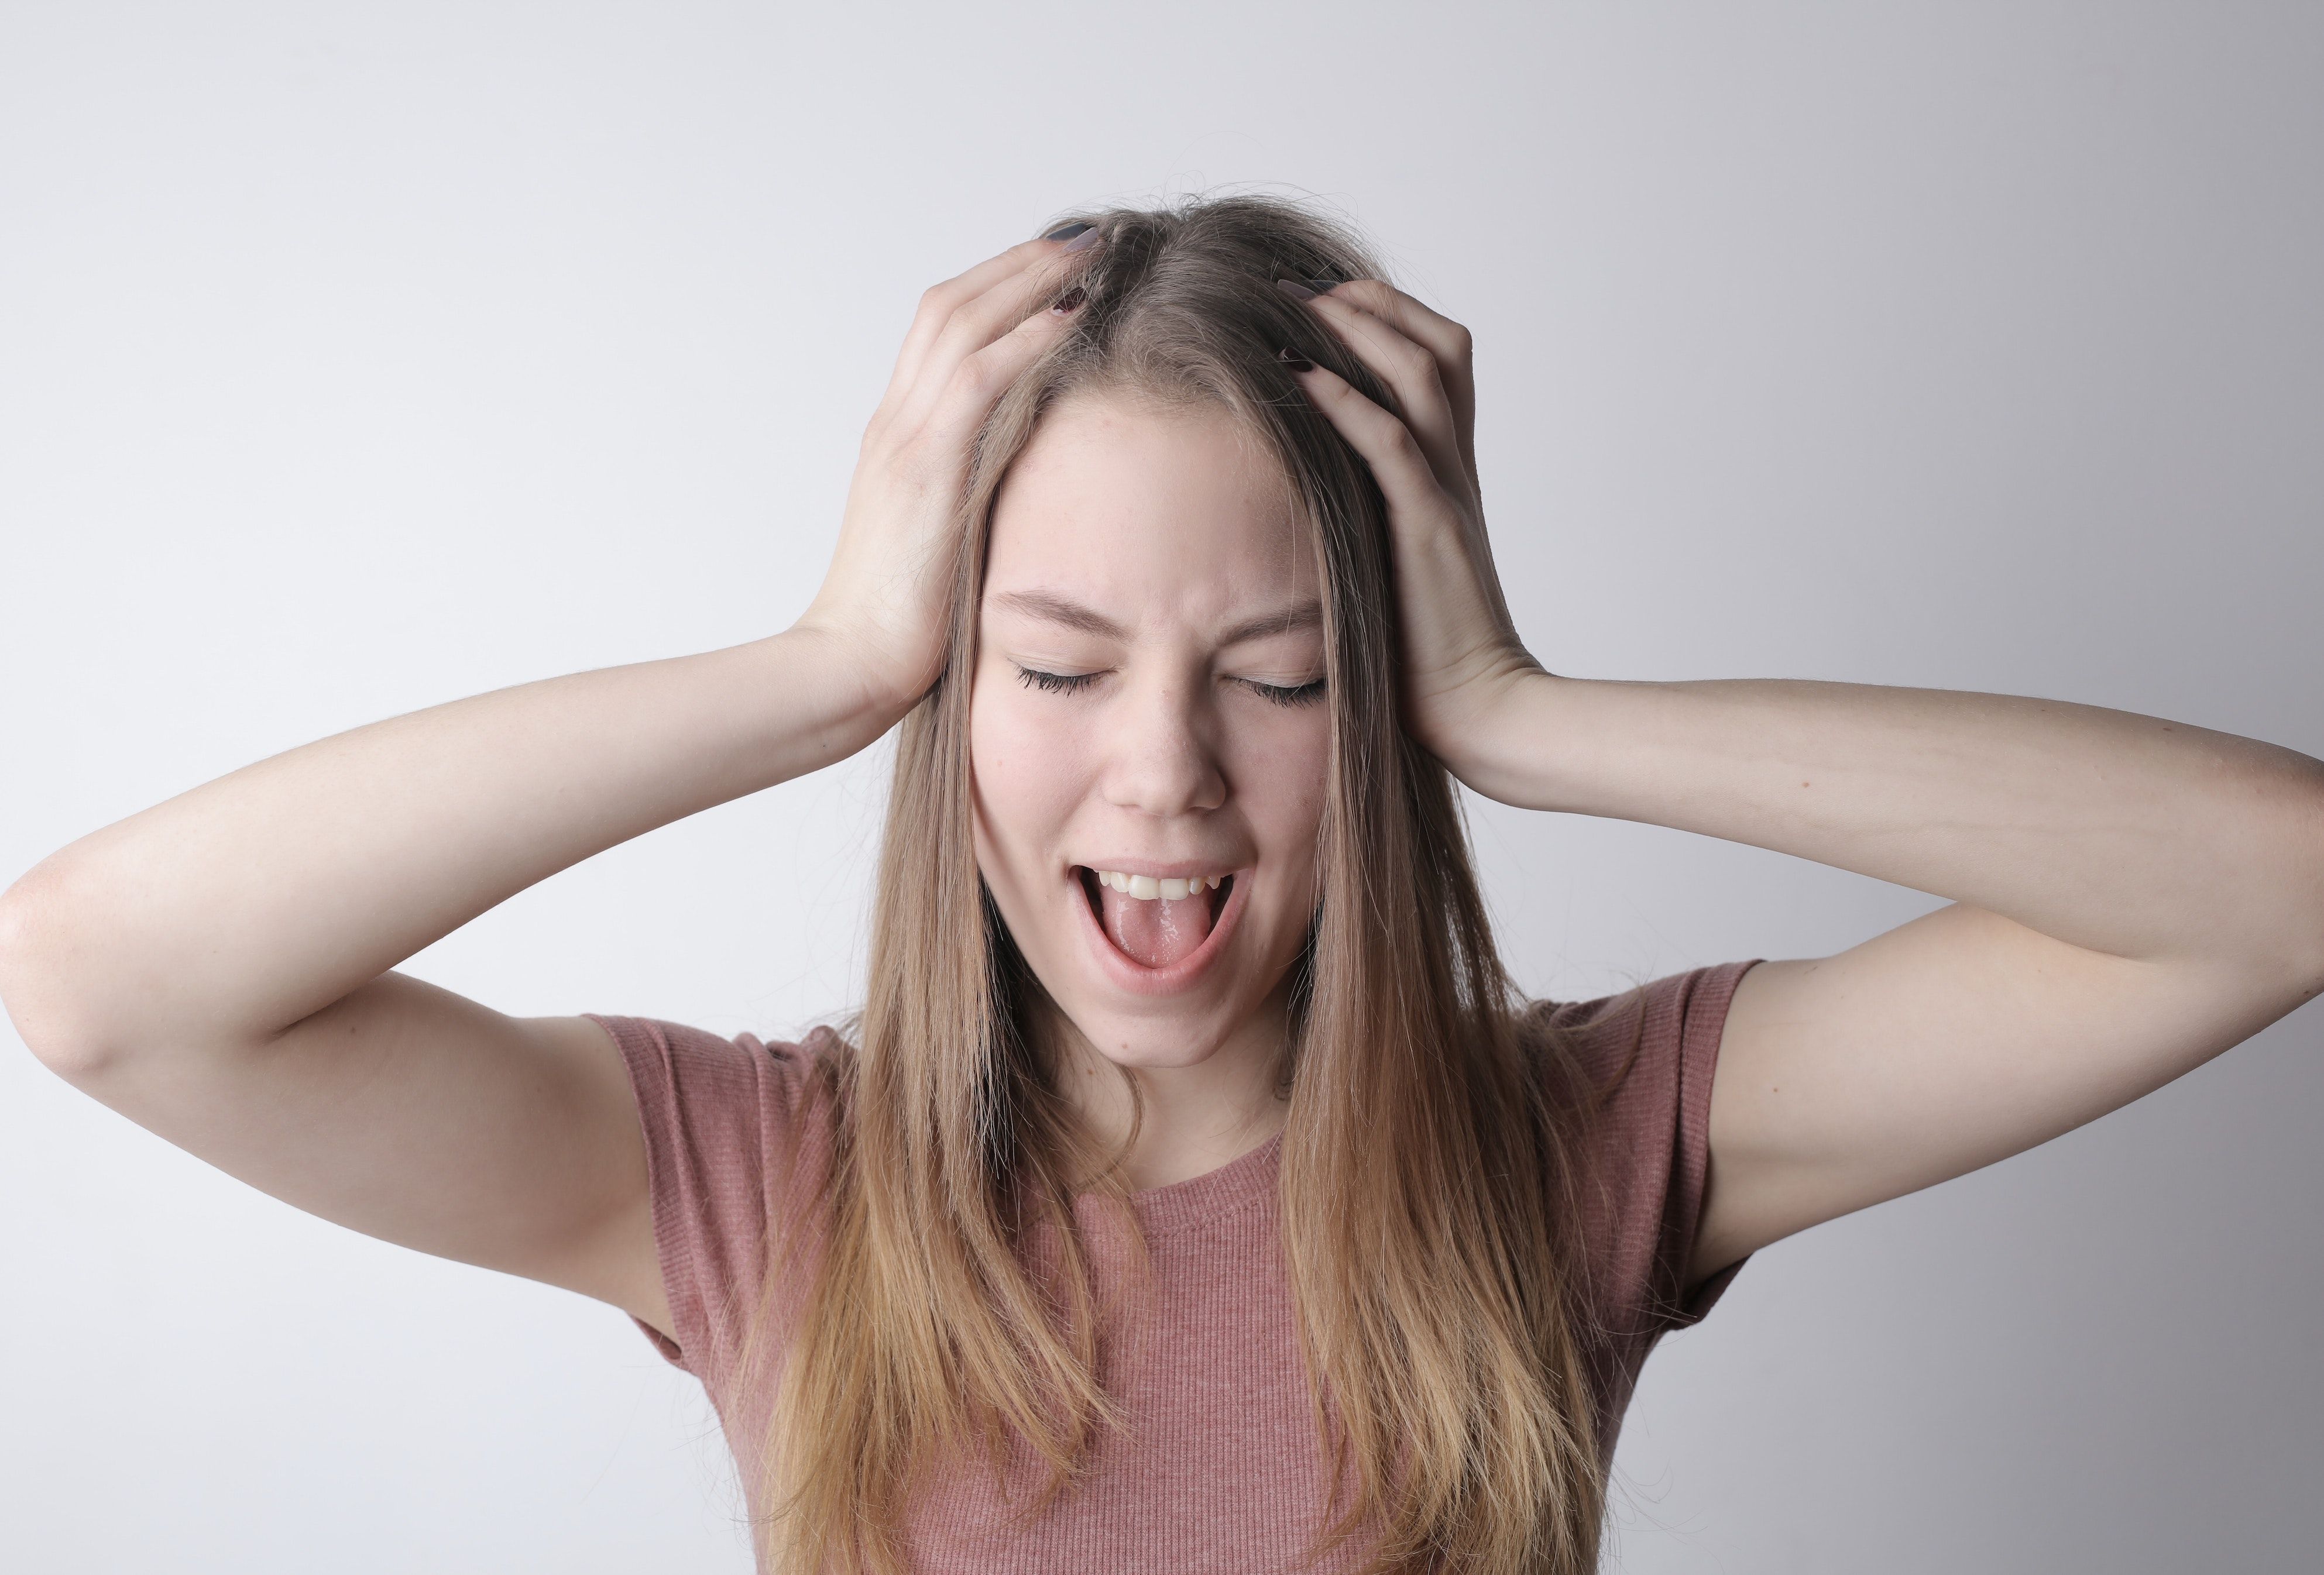 Open-mouthed girl in mauve shirt raises her hands to her head in frustration